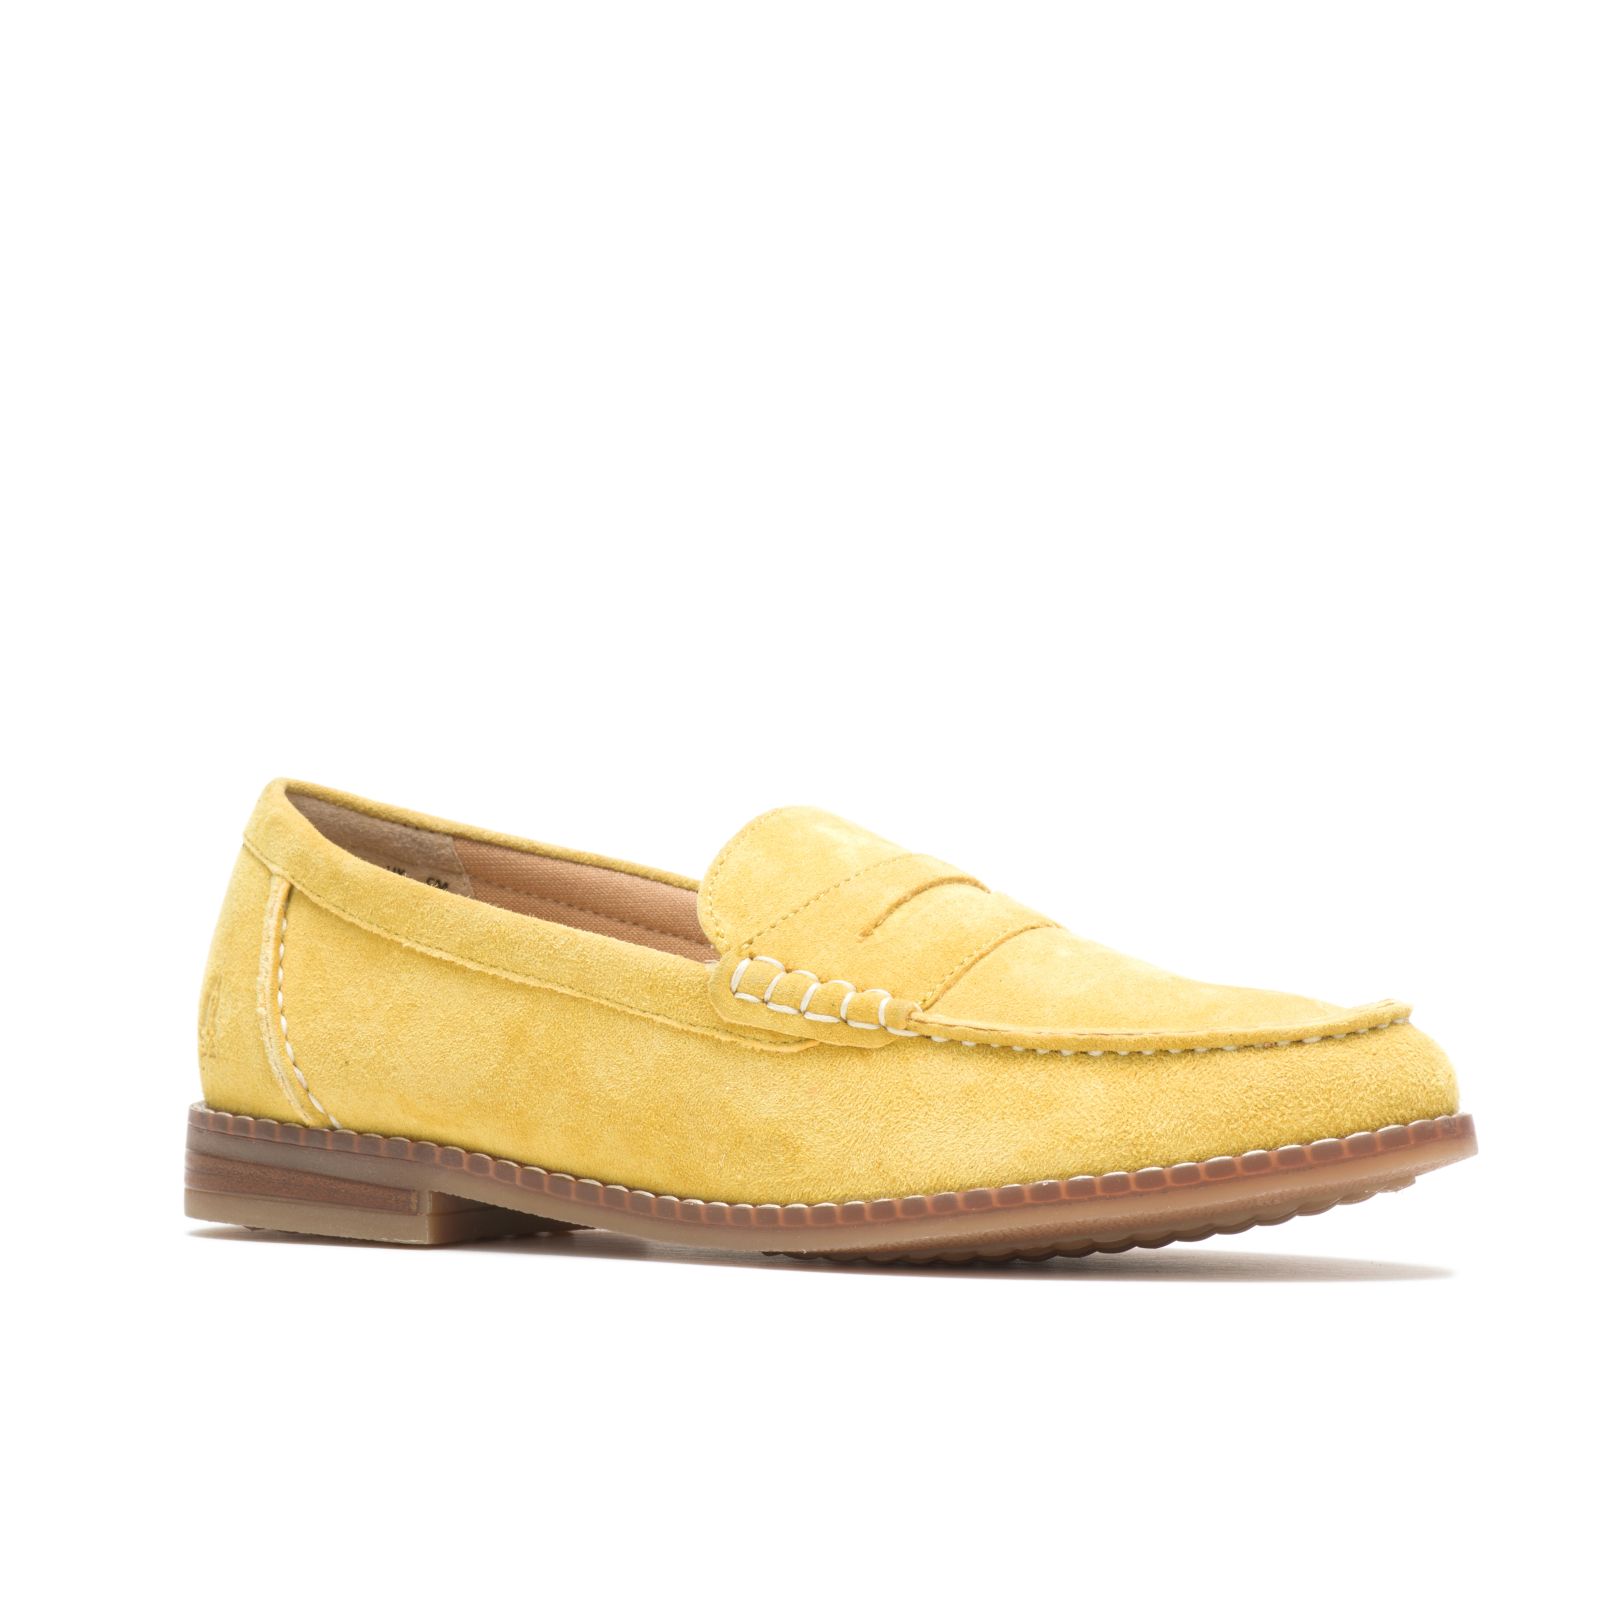 Loafers Hush Puppies Wren Mujer Azules Amarillos Oscuro | BZARXMO-58